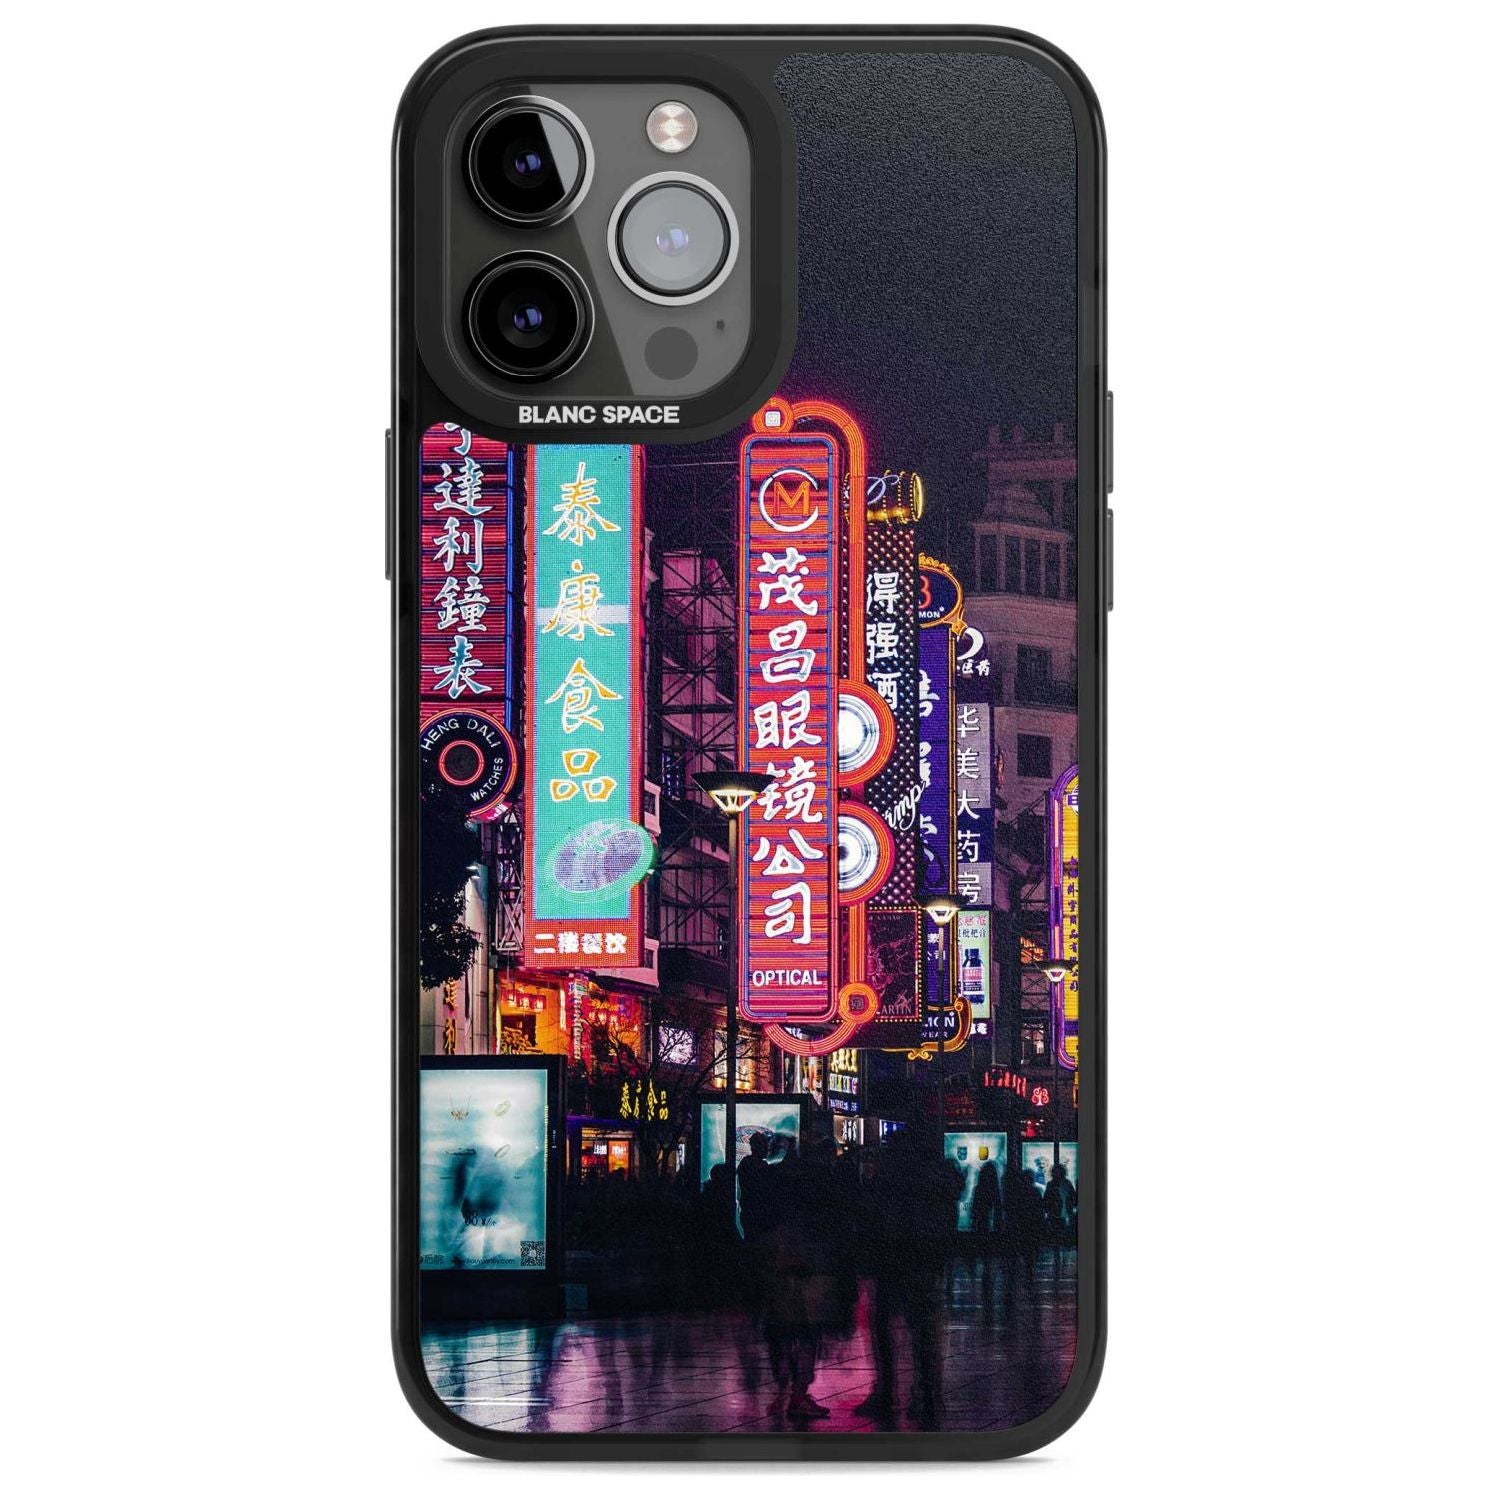 Busy Street - Neon Cities Photographs Phone Case iPhone 13 Pro Max / Magsafe Black Impact Case Blanc Space